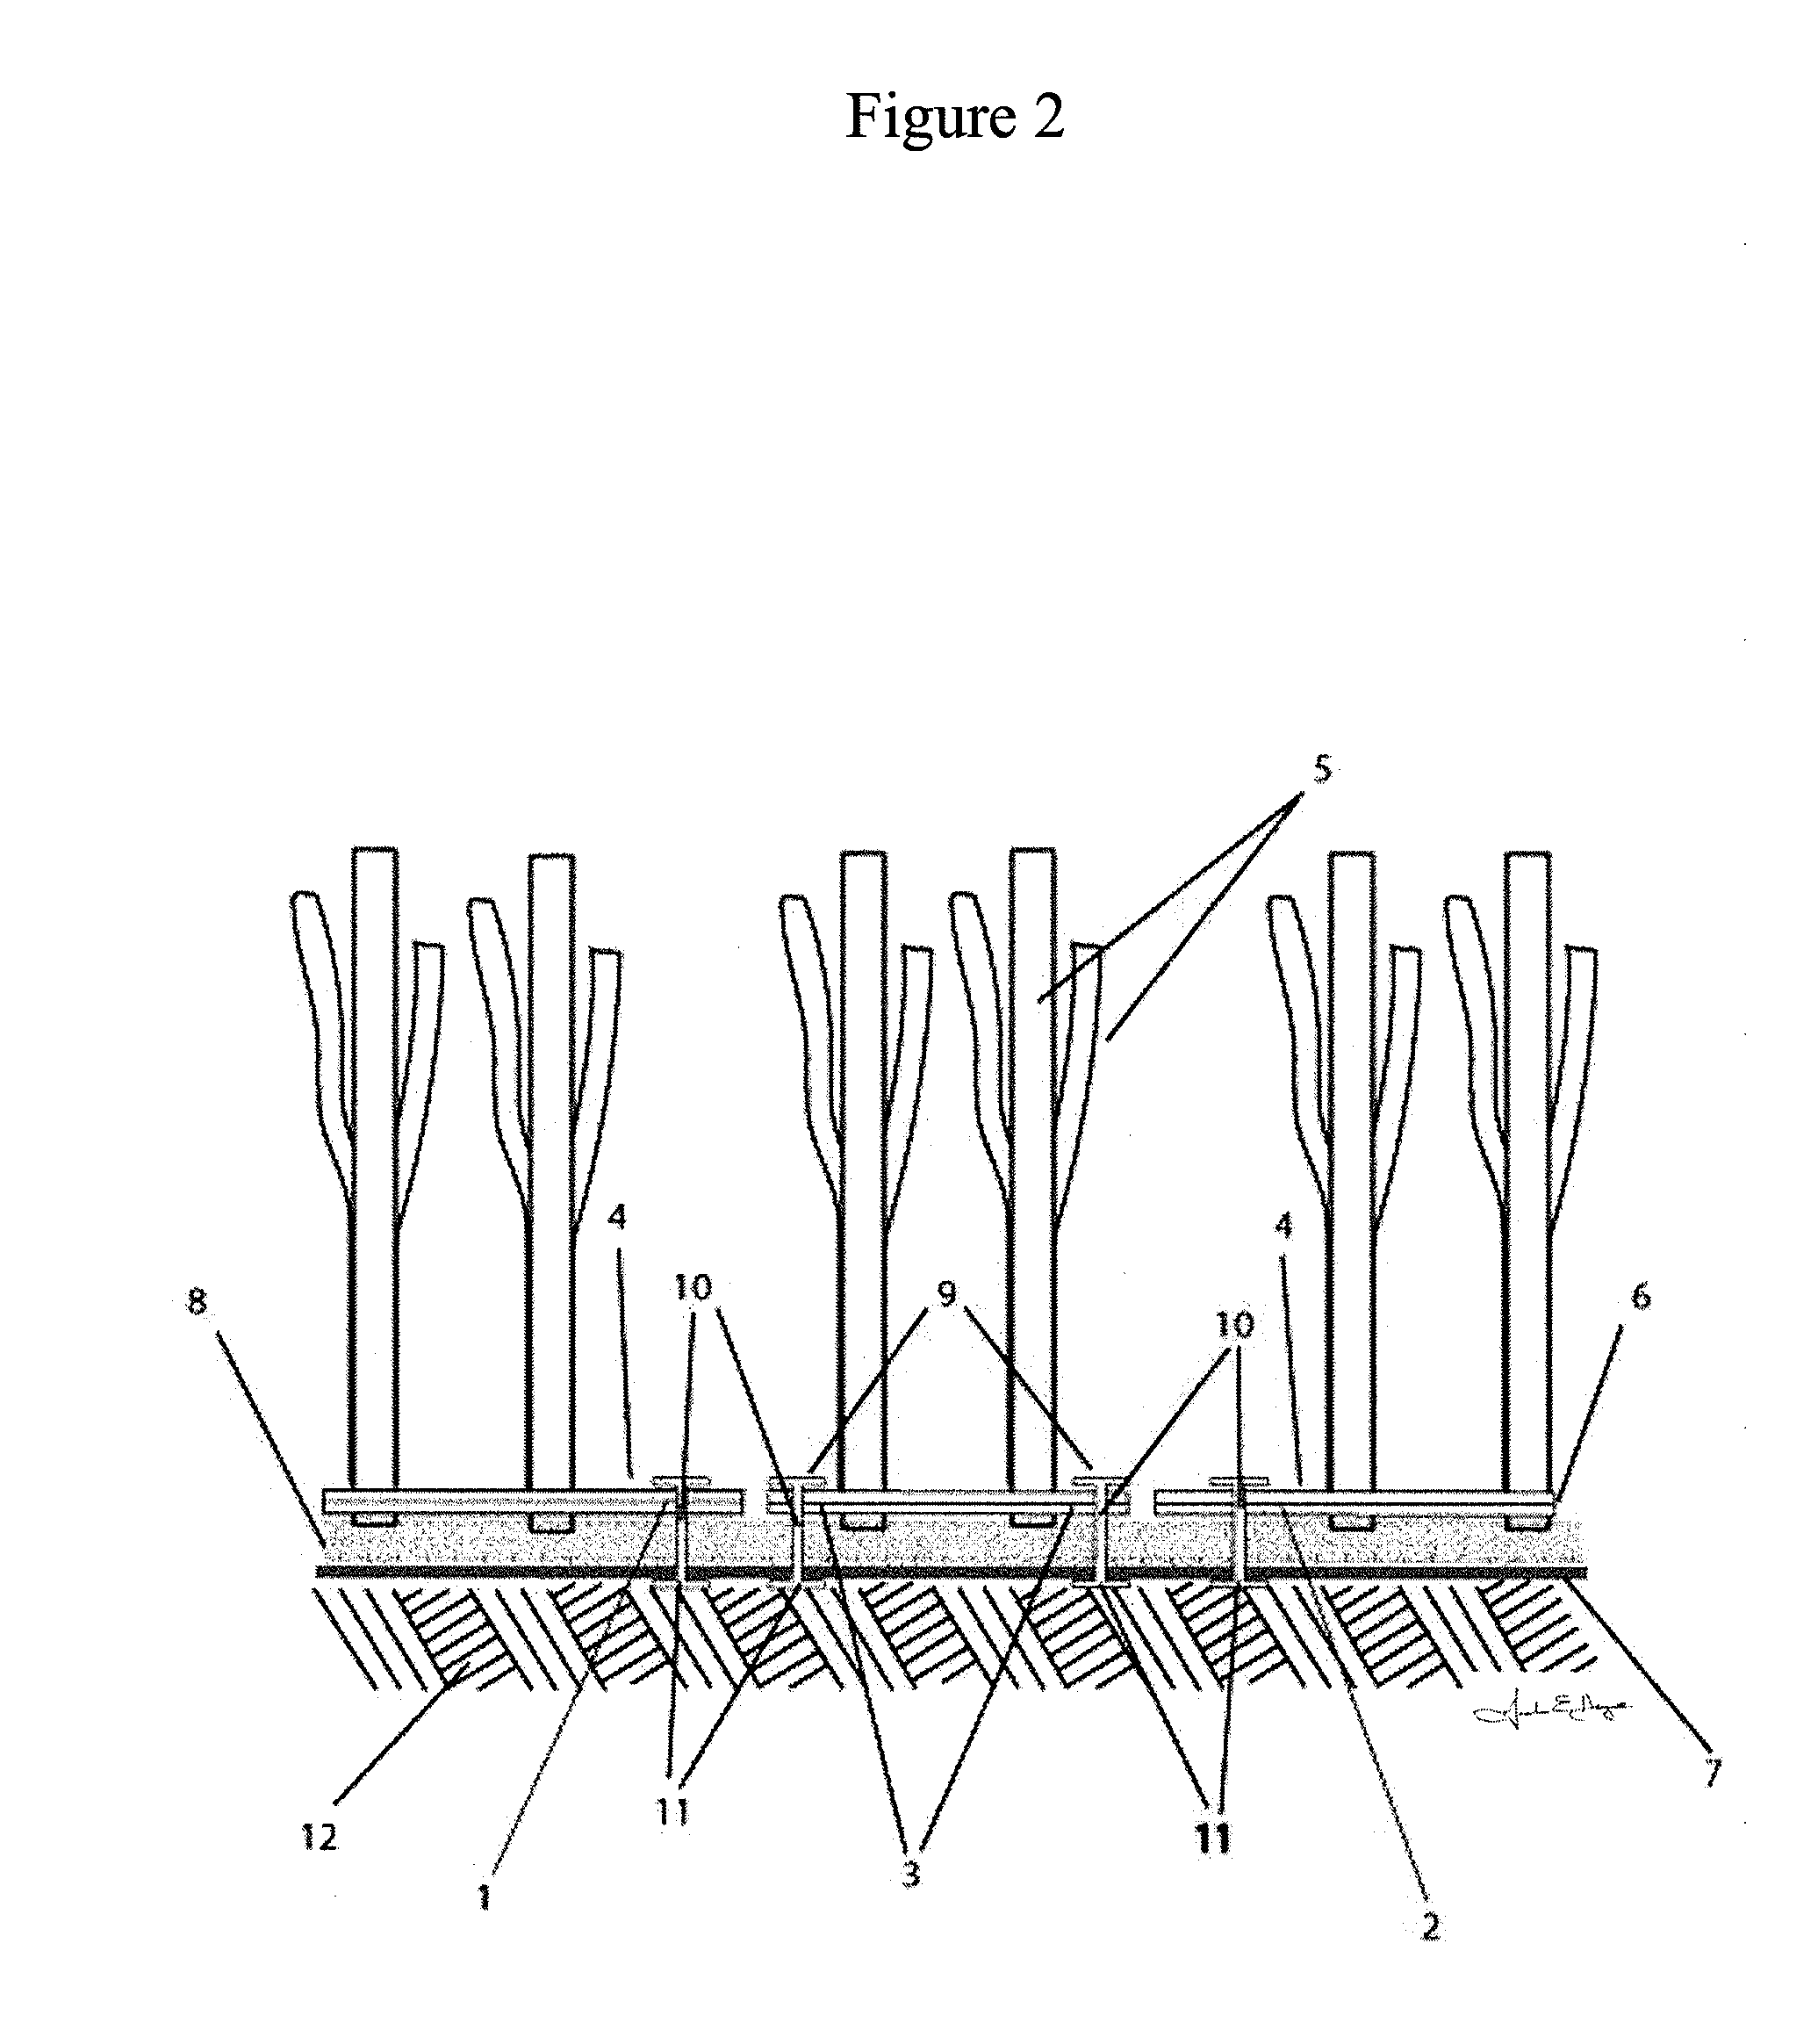 Method for reinforcing and reinforced synthetic inlays and seams